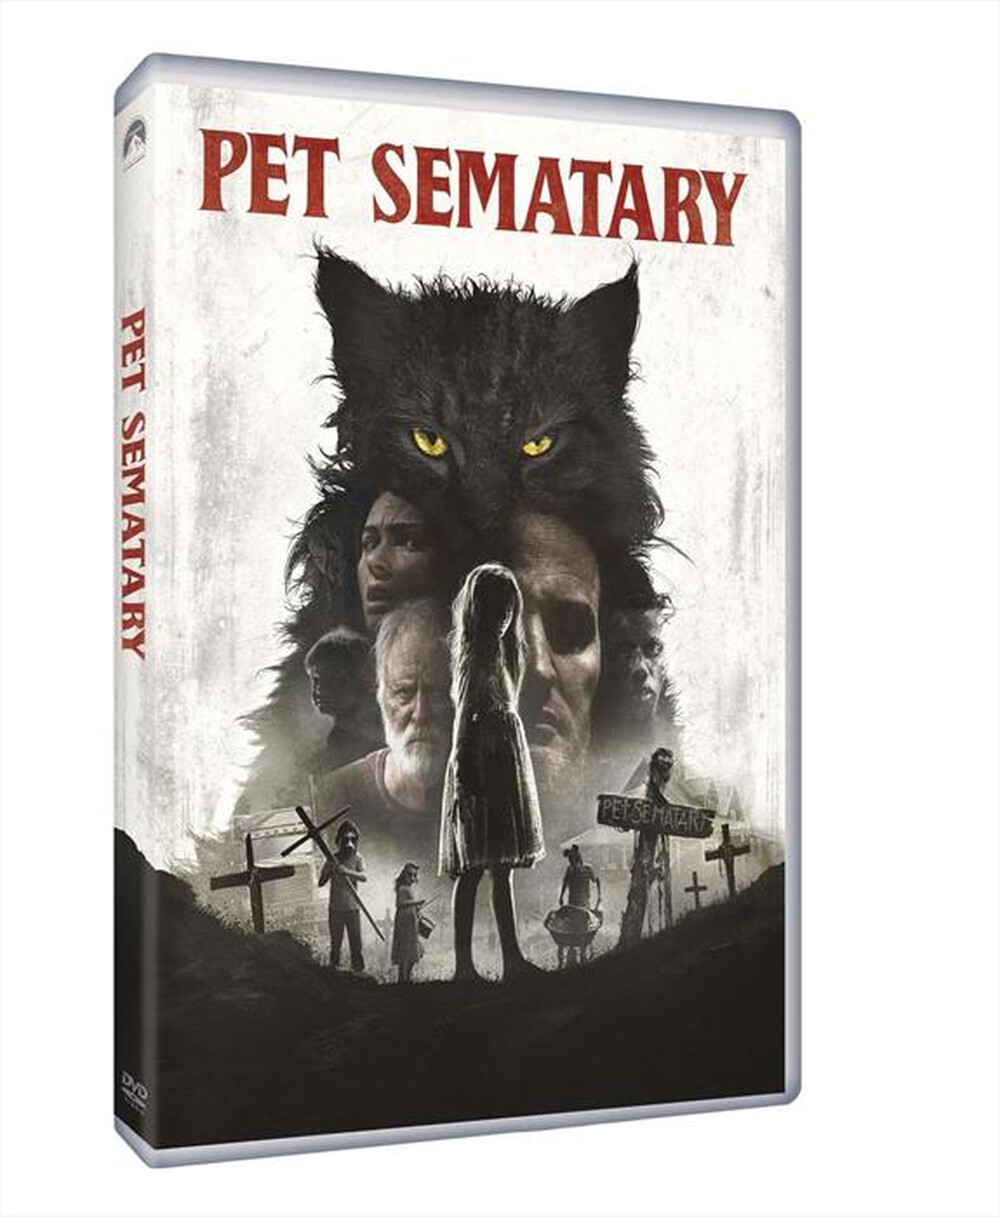 "UNIVERSAL PICTURES - Pet Sematary (2019)"